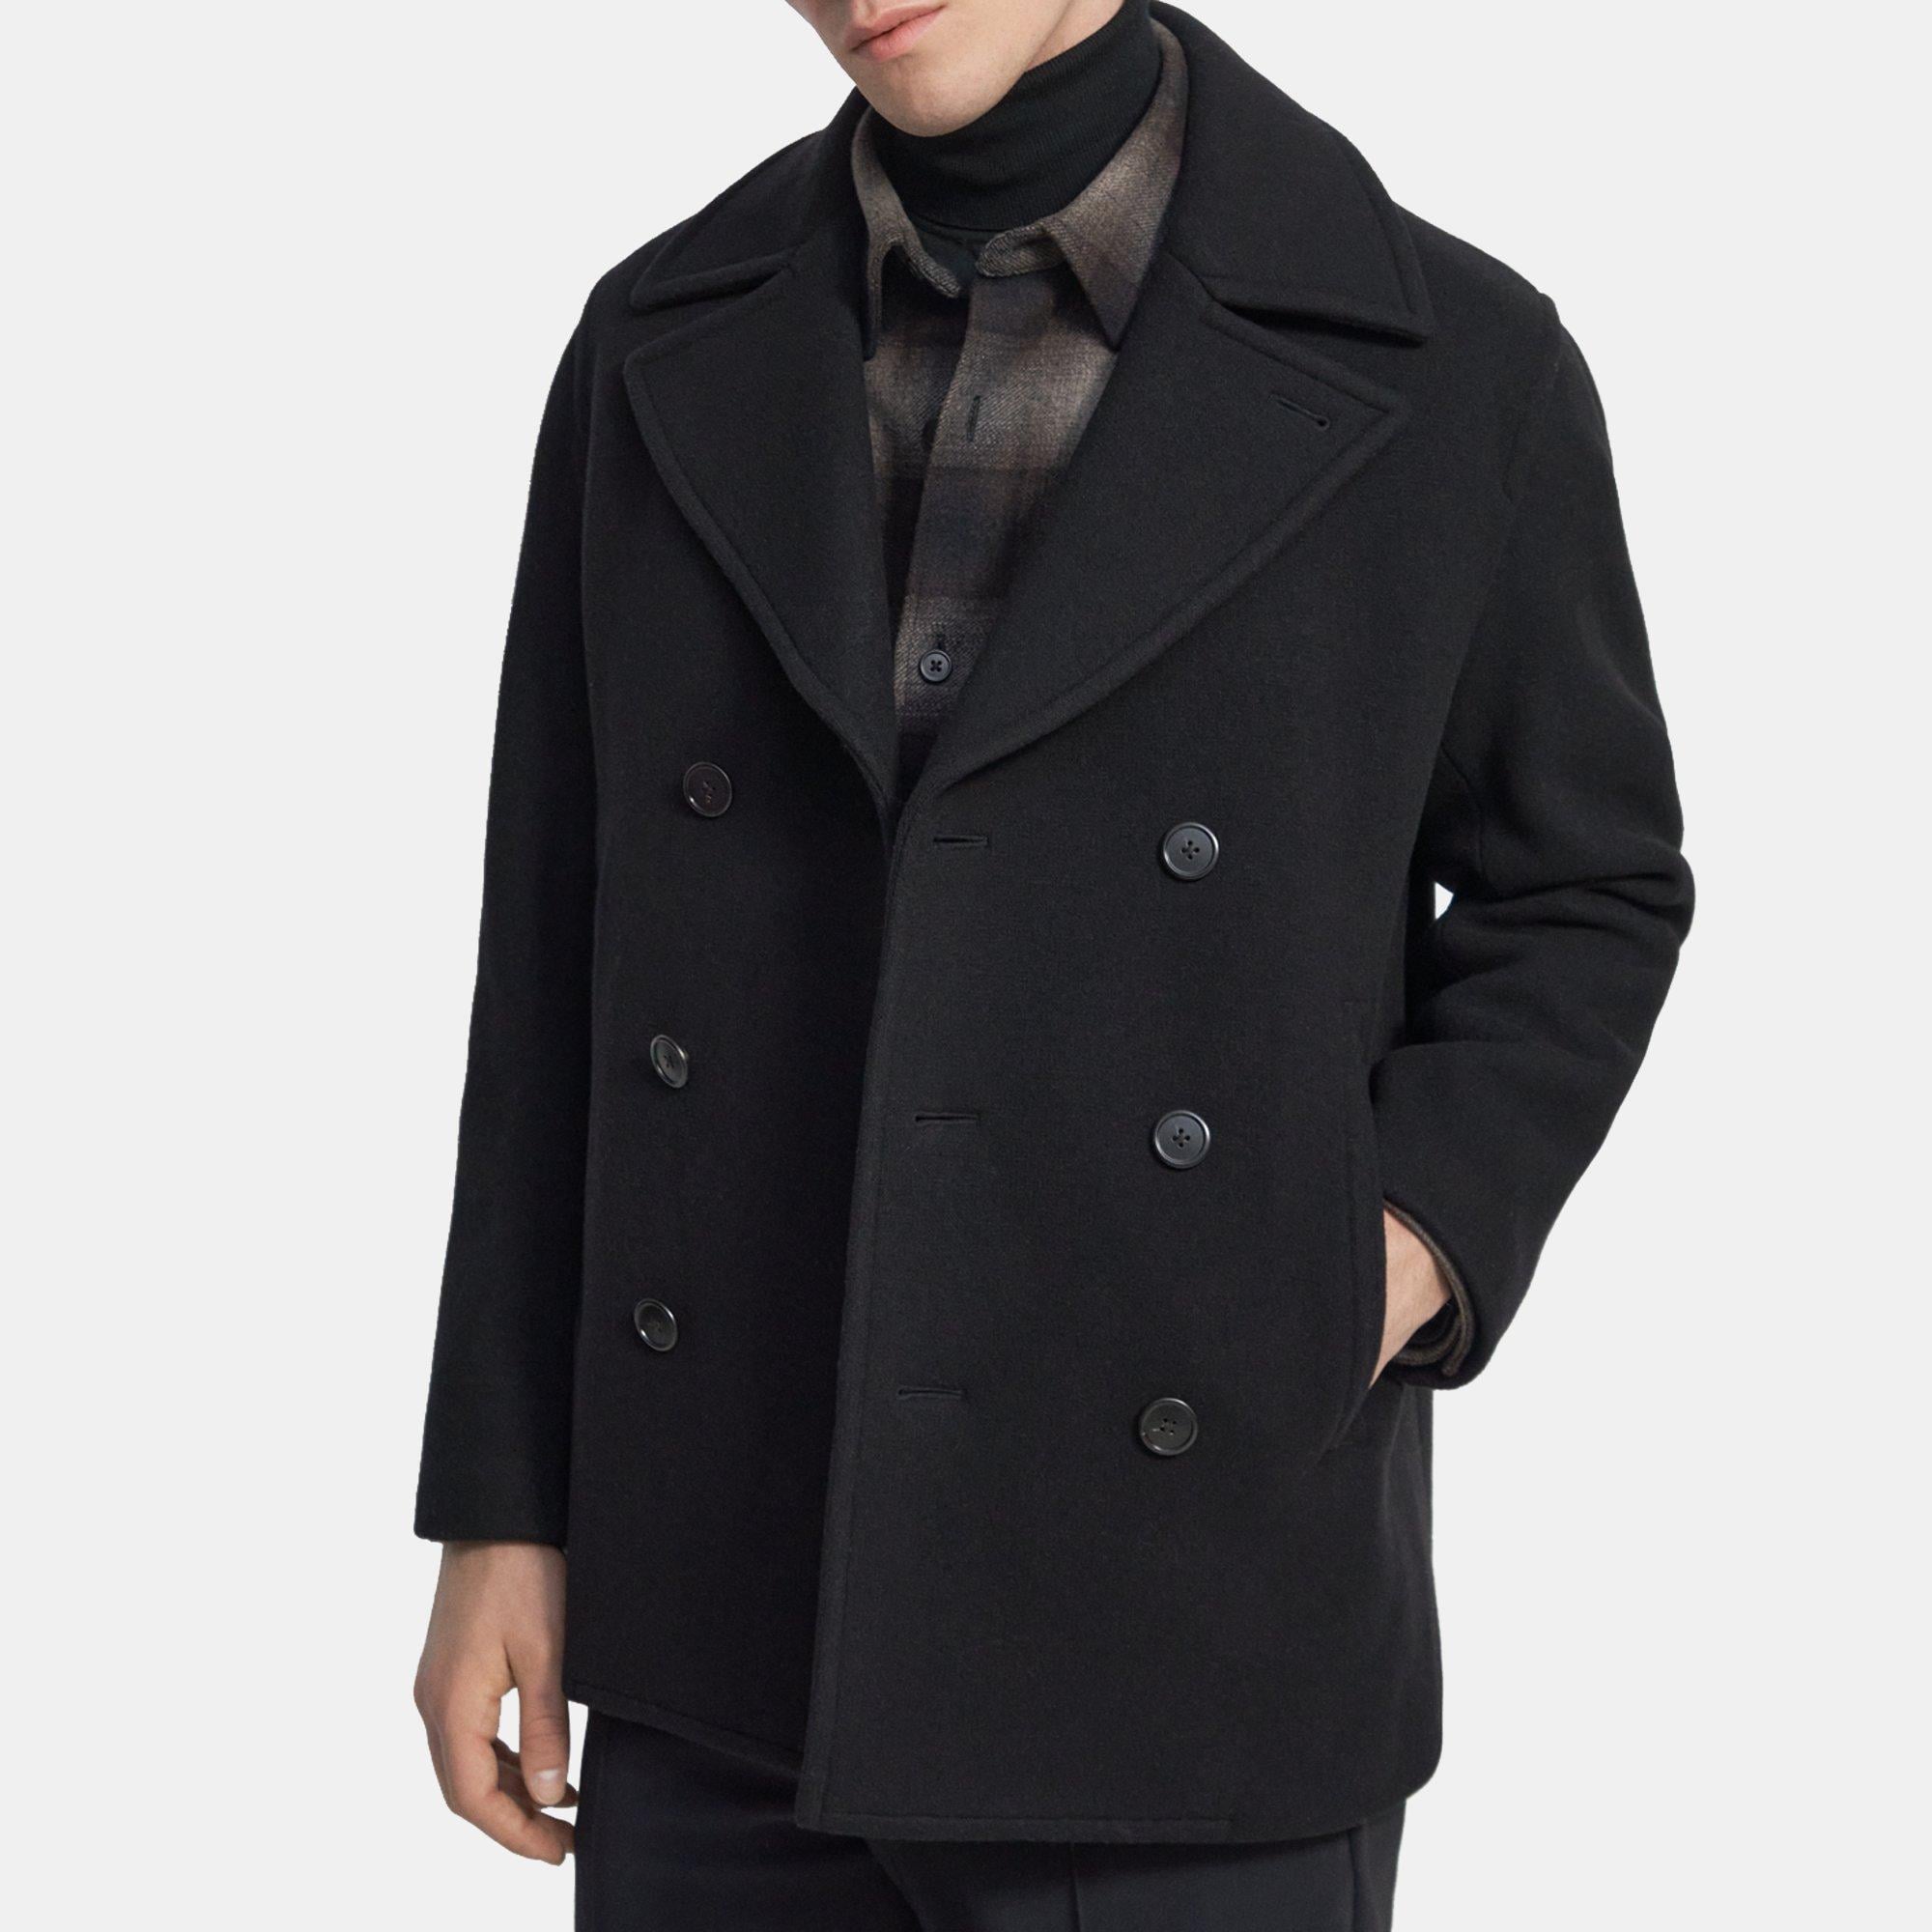 Theory Peacoat in Knit Wool